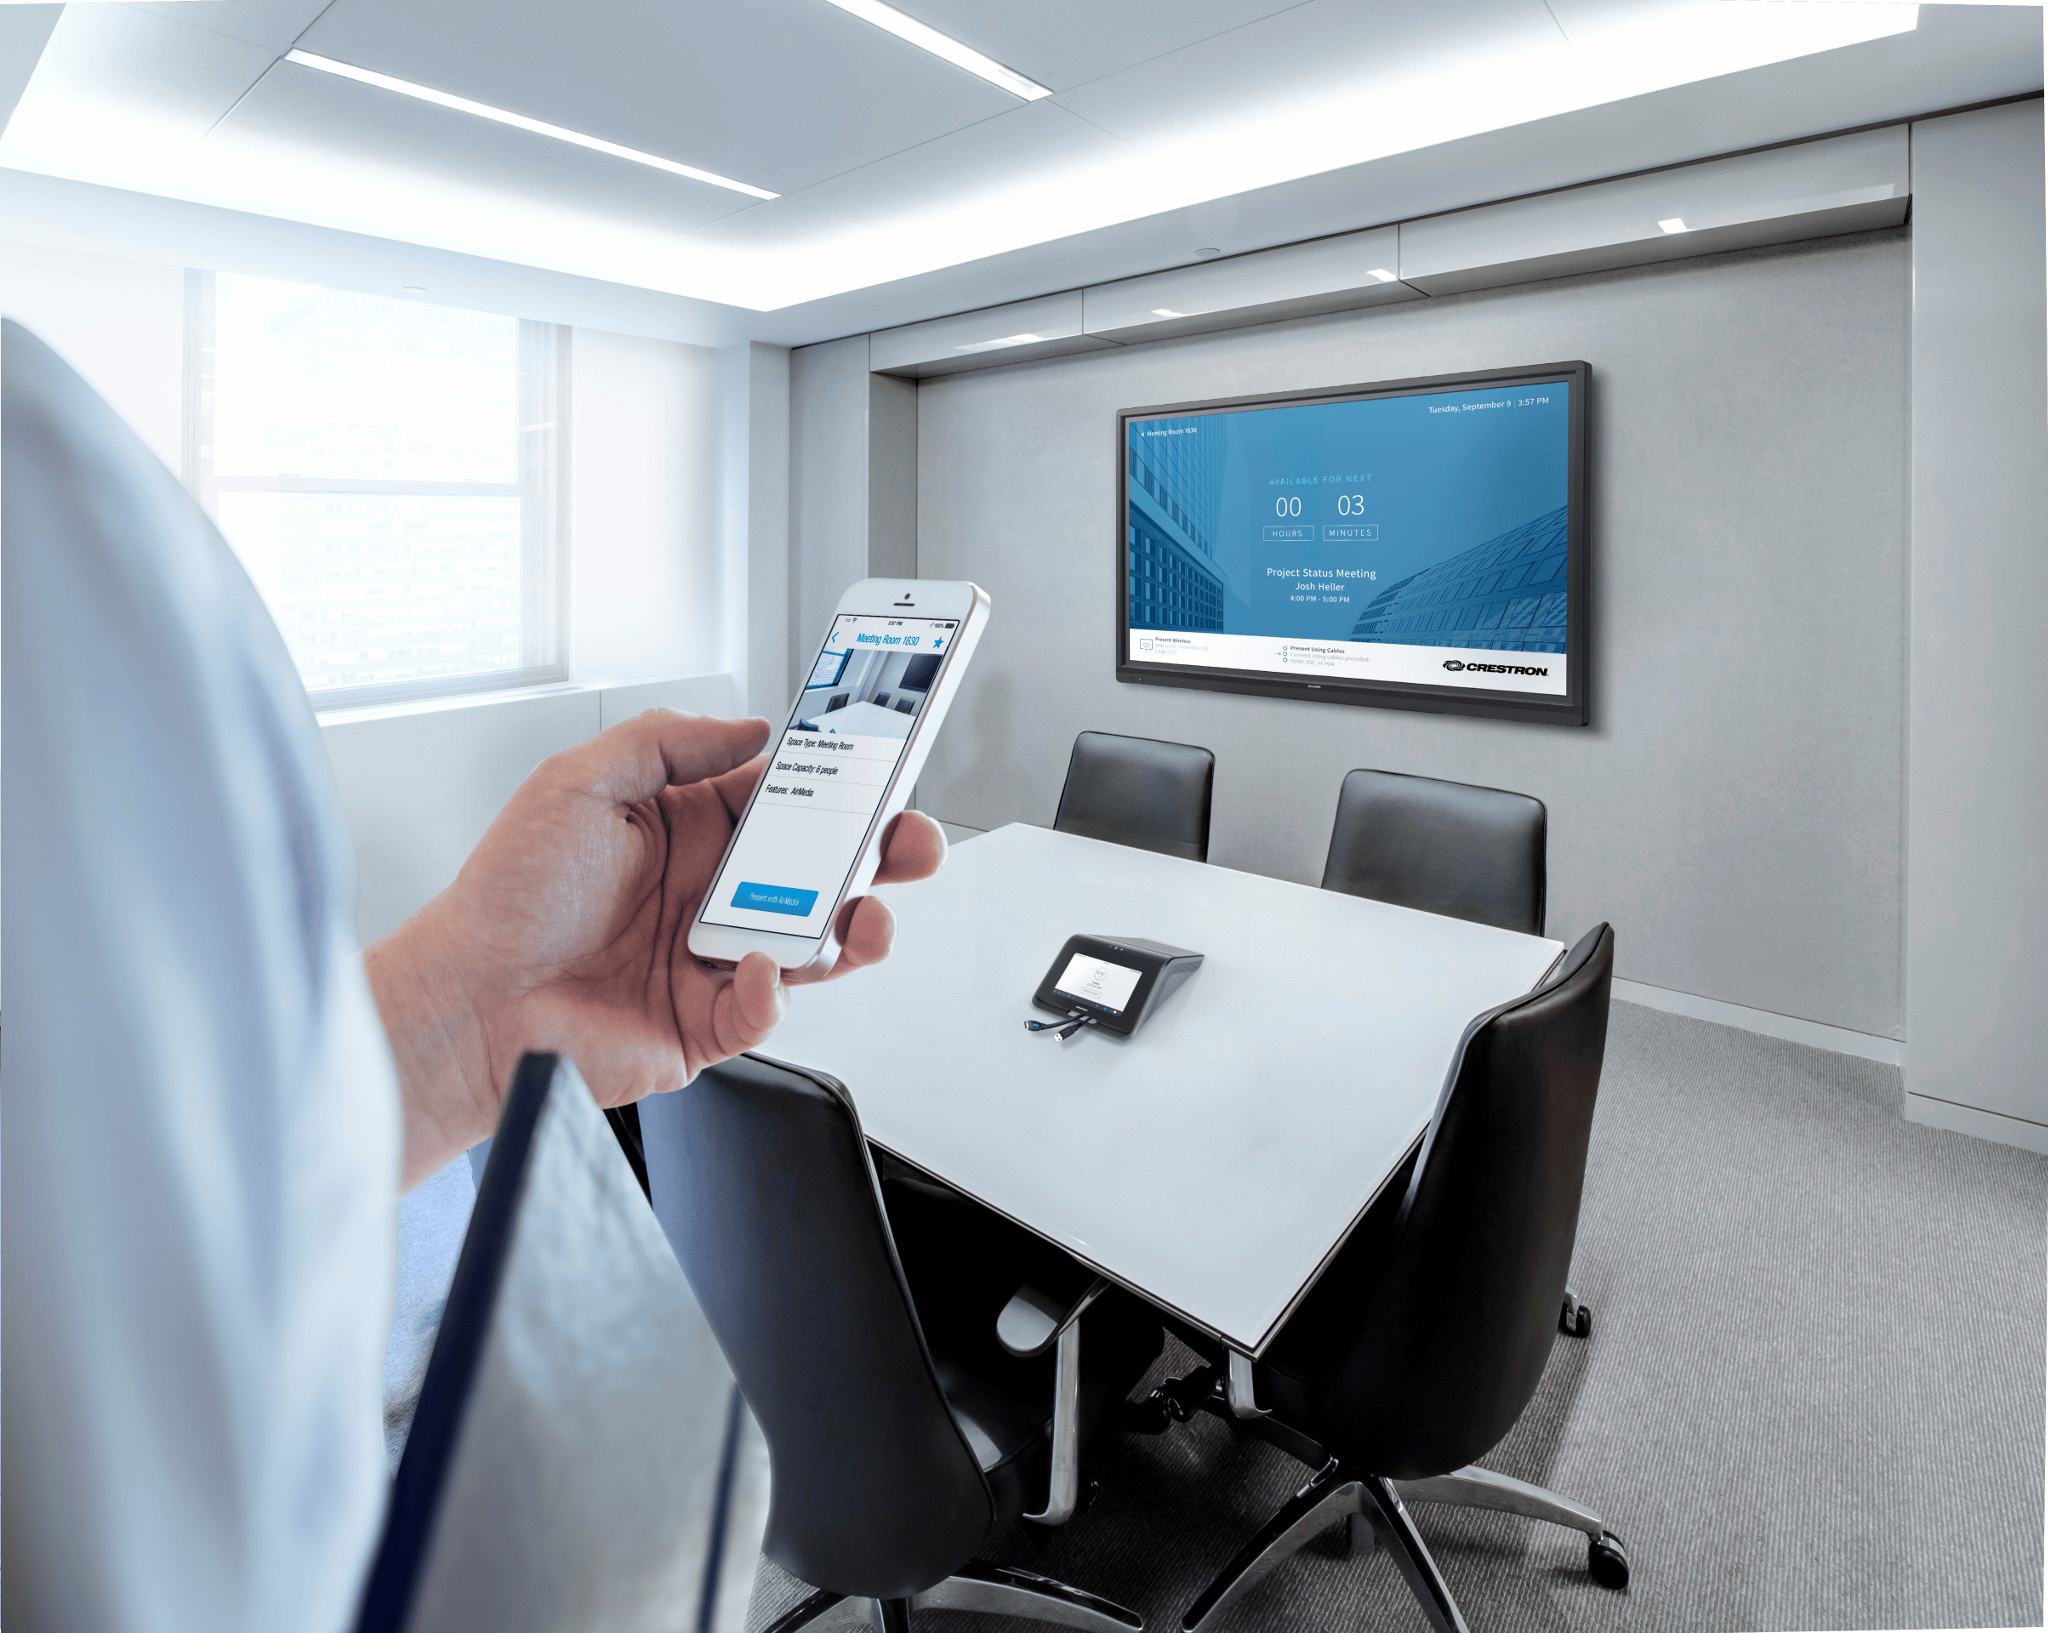 Crestron Mercury is all you need to transform any room into a powerful conferencing and collaboration space